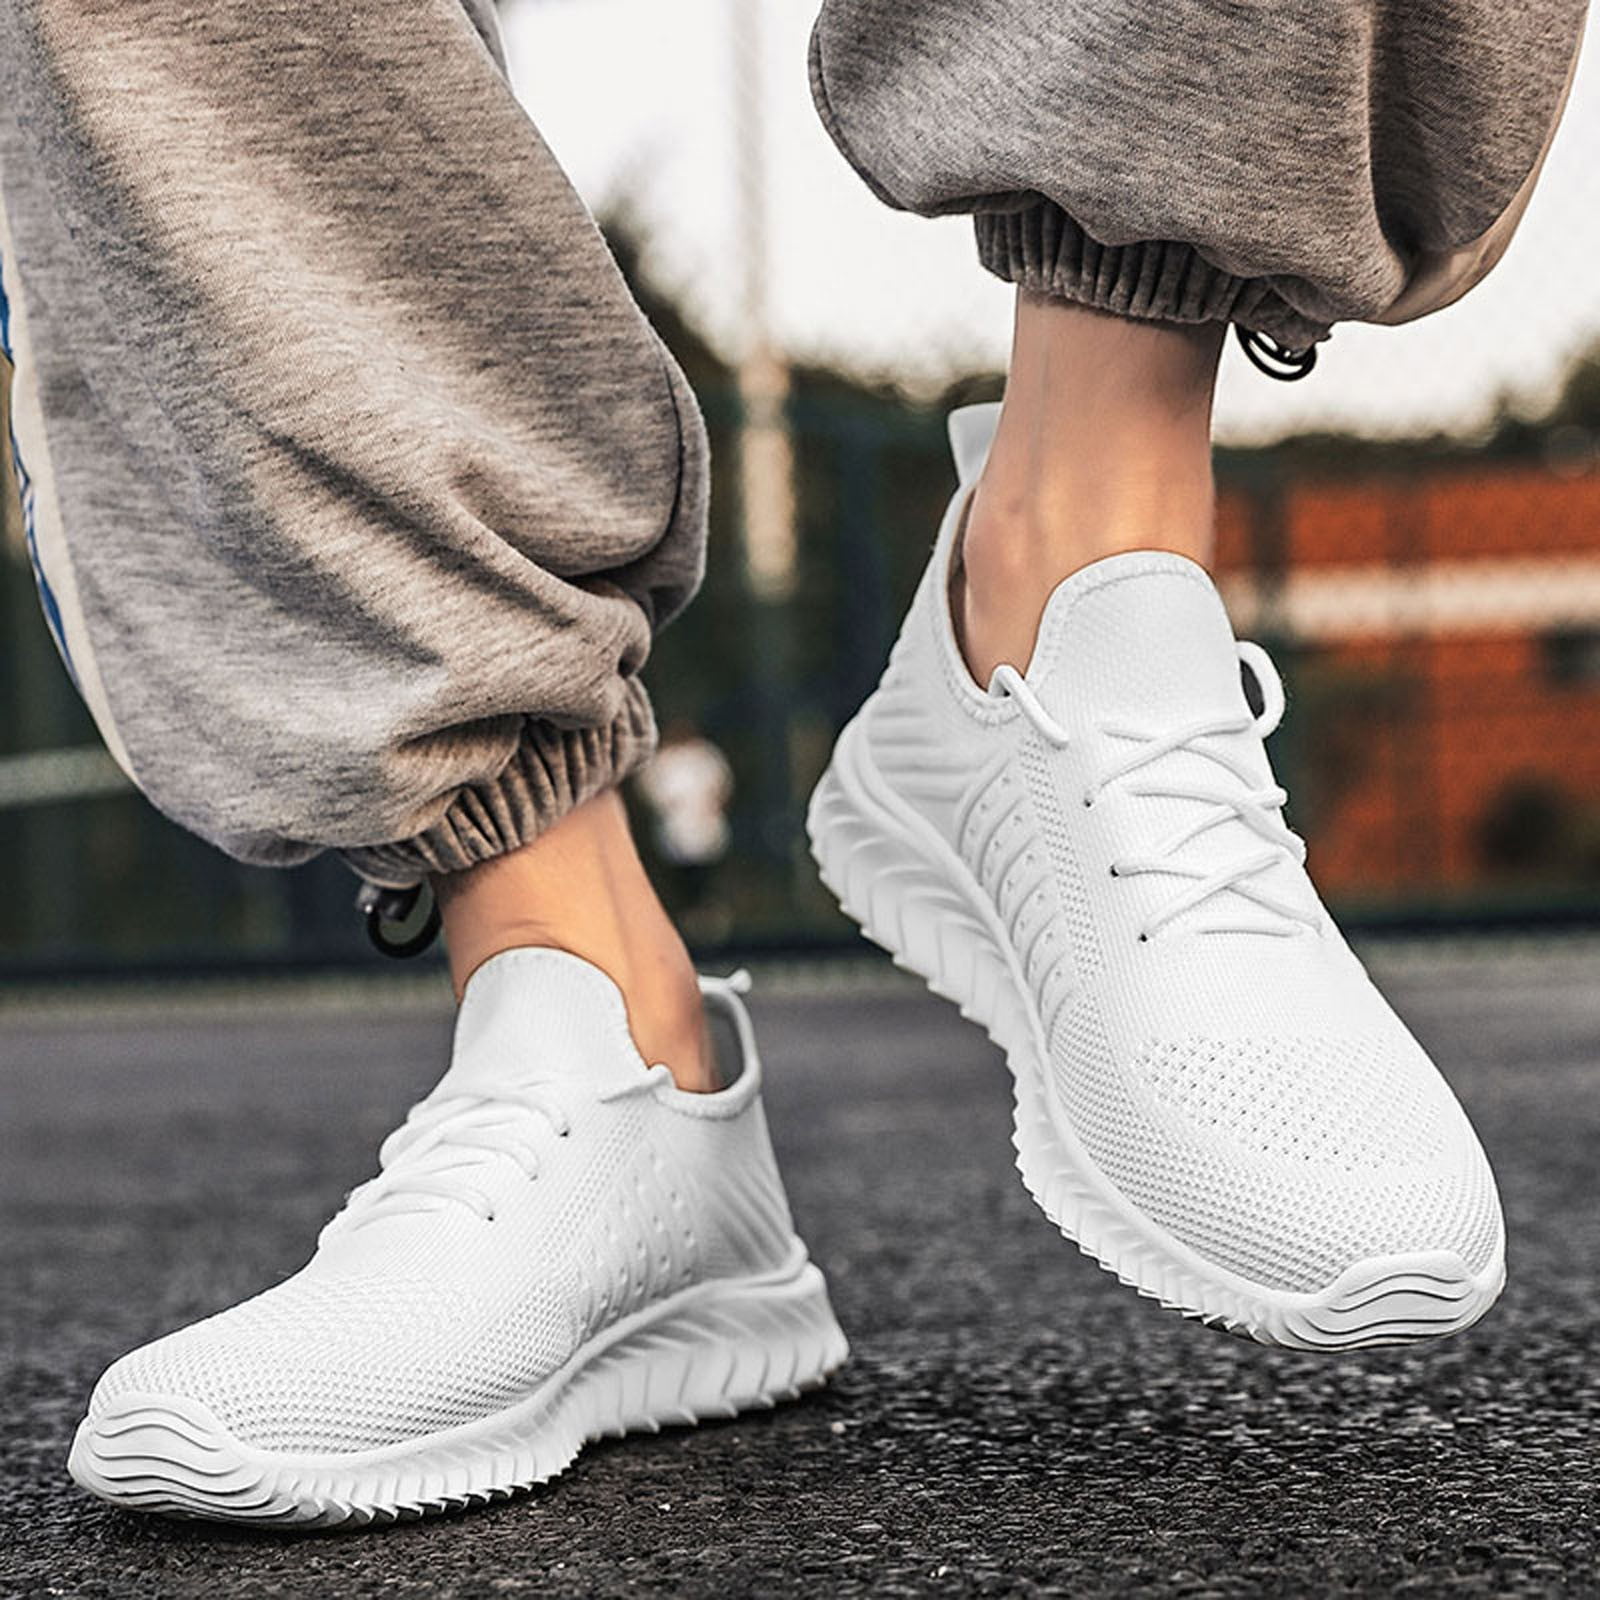 Sneakers For Men Casual Shoes Fashion Men Mesh Casual Sport Shoes Lace-Up  Breathable Soft Bottom Sneakers 